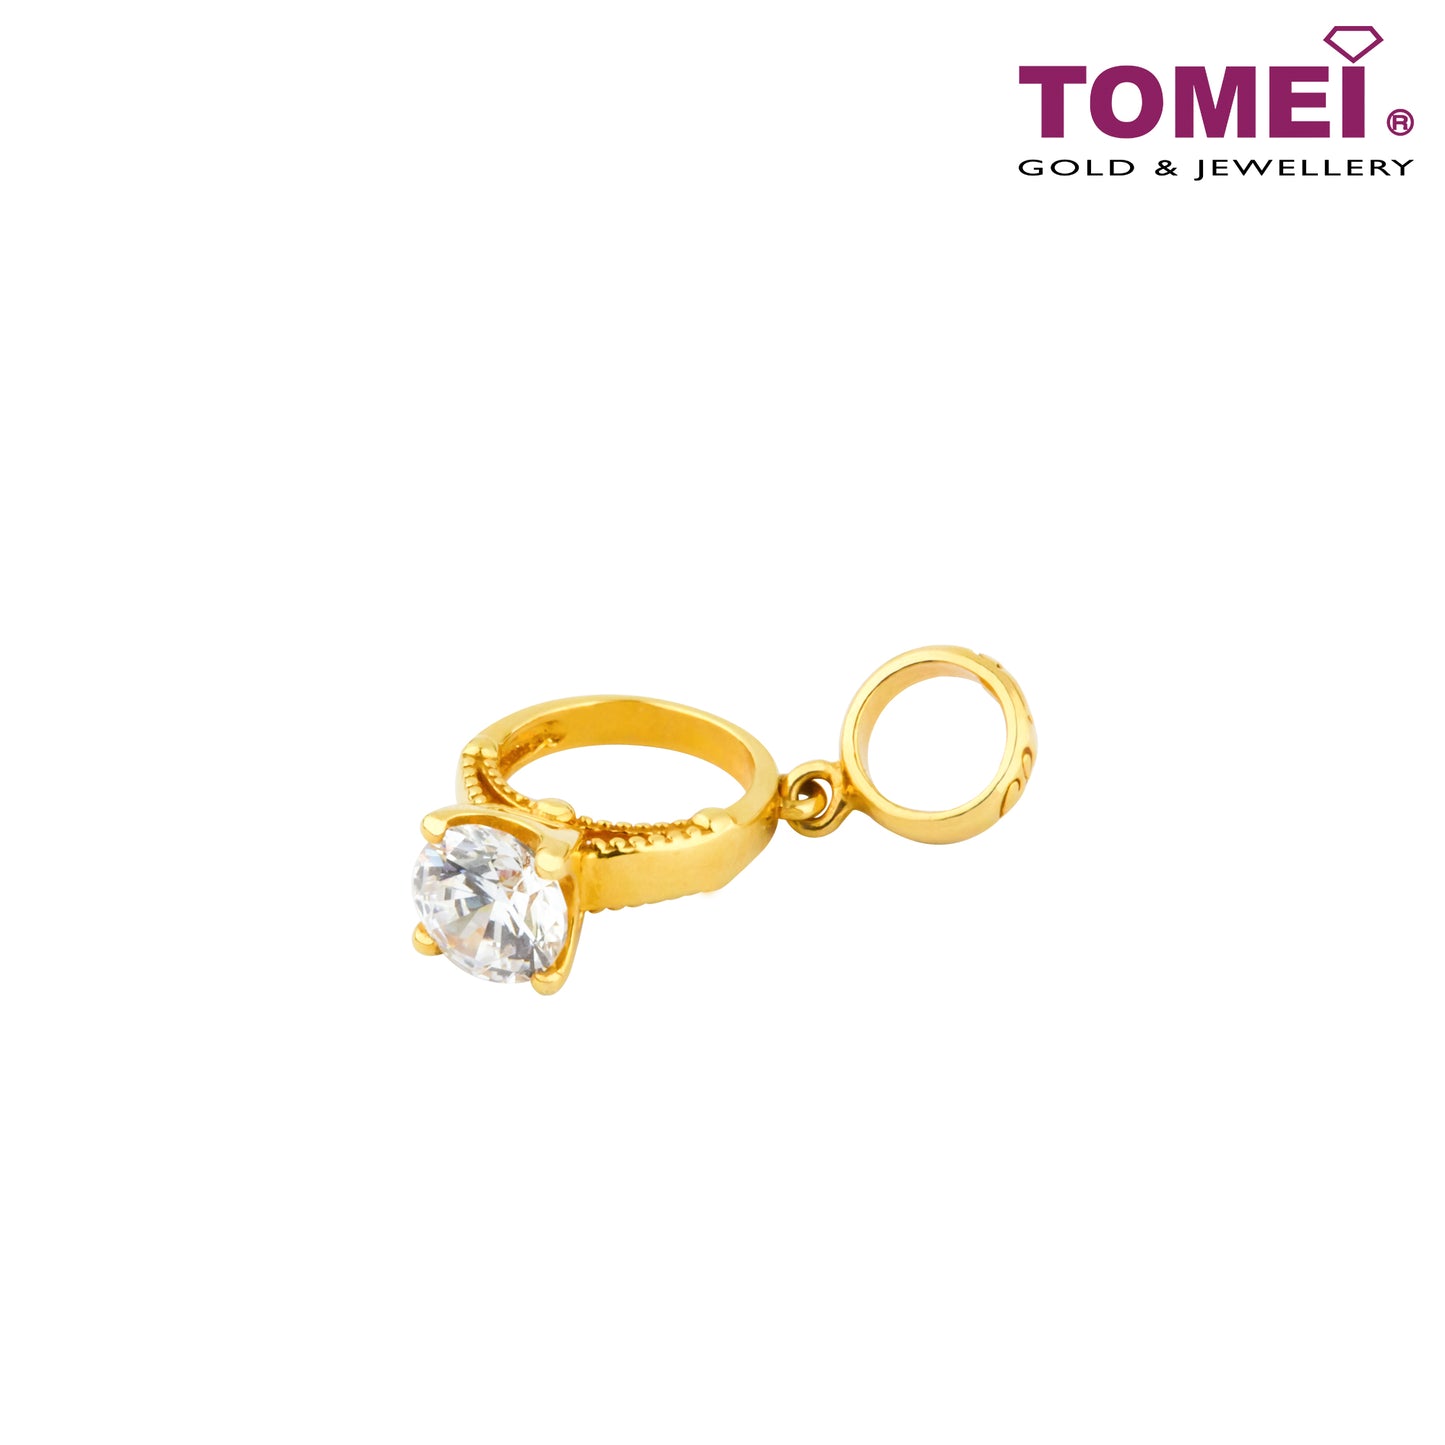 Tribute to Remarkable Women Diamond Ring Chomel Charm, Tomei Yellow Gold 916